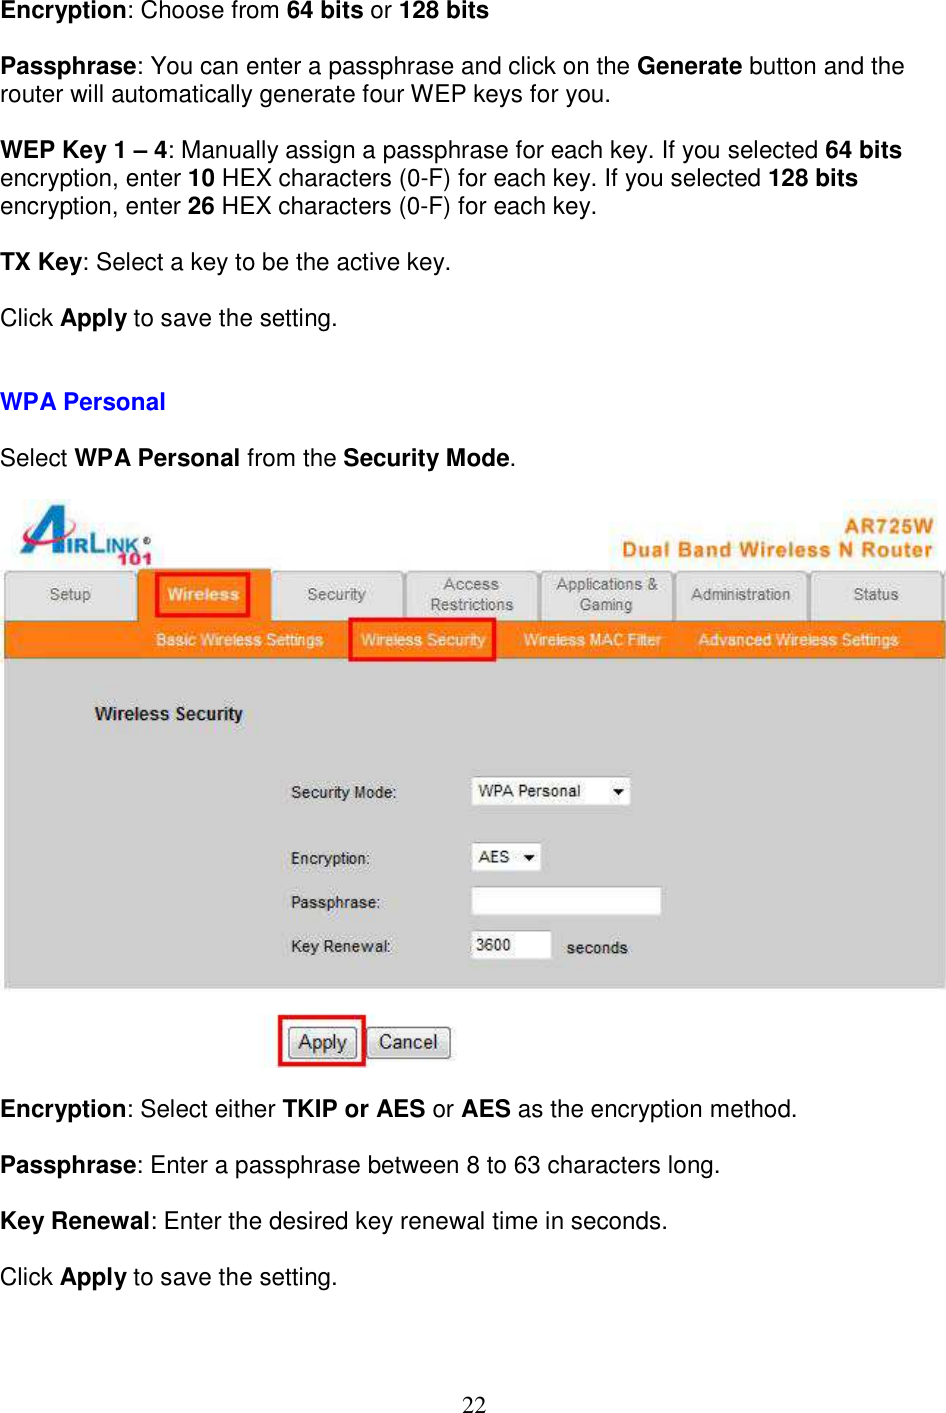 22 Encryption: Choose from 64 bits or 128 bits  Passphrase: You can enter a passphrase and click on the Generate button and the router will automatically generate four WEP keys for you.  WEP Key 1 – 4: Manually assign a passphrase for each key. If you selected 64 bits encryption, enter 10 HEX characters (0-F) for each key. If you selected 128 bits encryption, enter 26 HEX characters (0-F) for each key.  TX Key: Select a key to be the active key.  Click Apply to save the setting.   WPA Personal  Select WPA Personal from the Security Mode.    Encryption: Select either TKIP or AES or AES as the encryption method.  Passphrase: Enter a passphrase between 8 to 63 characters long.  Key Renewal: Enter the desired key renewal time in seconds.  Click Apply to save the setting.   